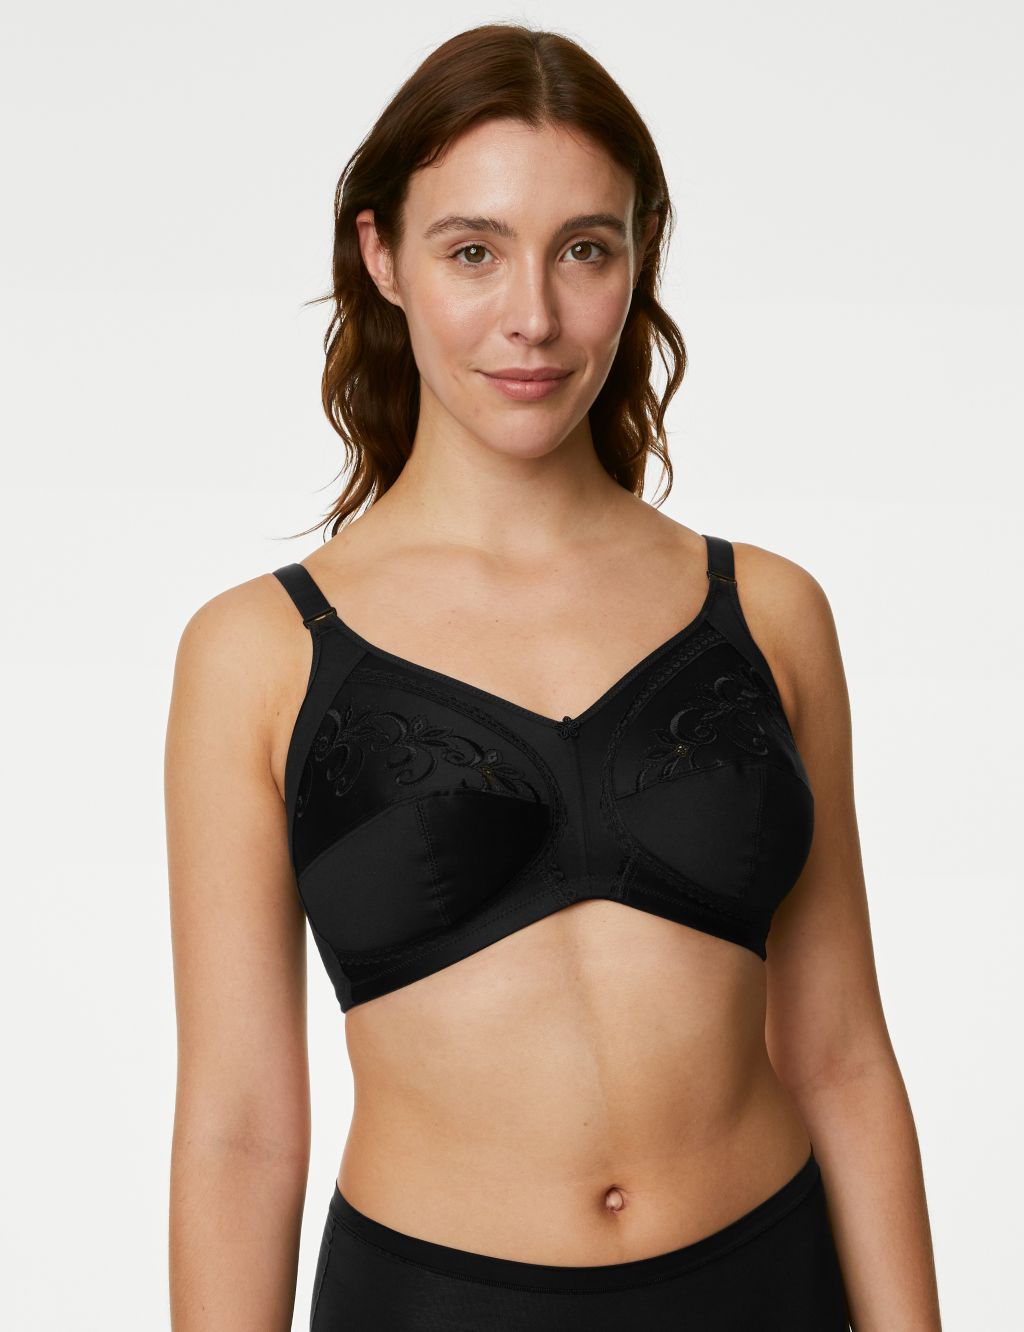 M&S Full Cup Bra Non-Wired Total Support Bahrain